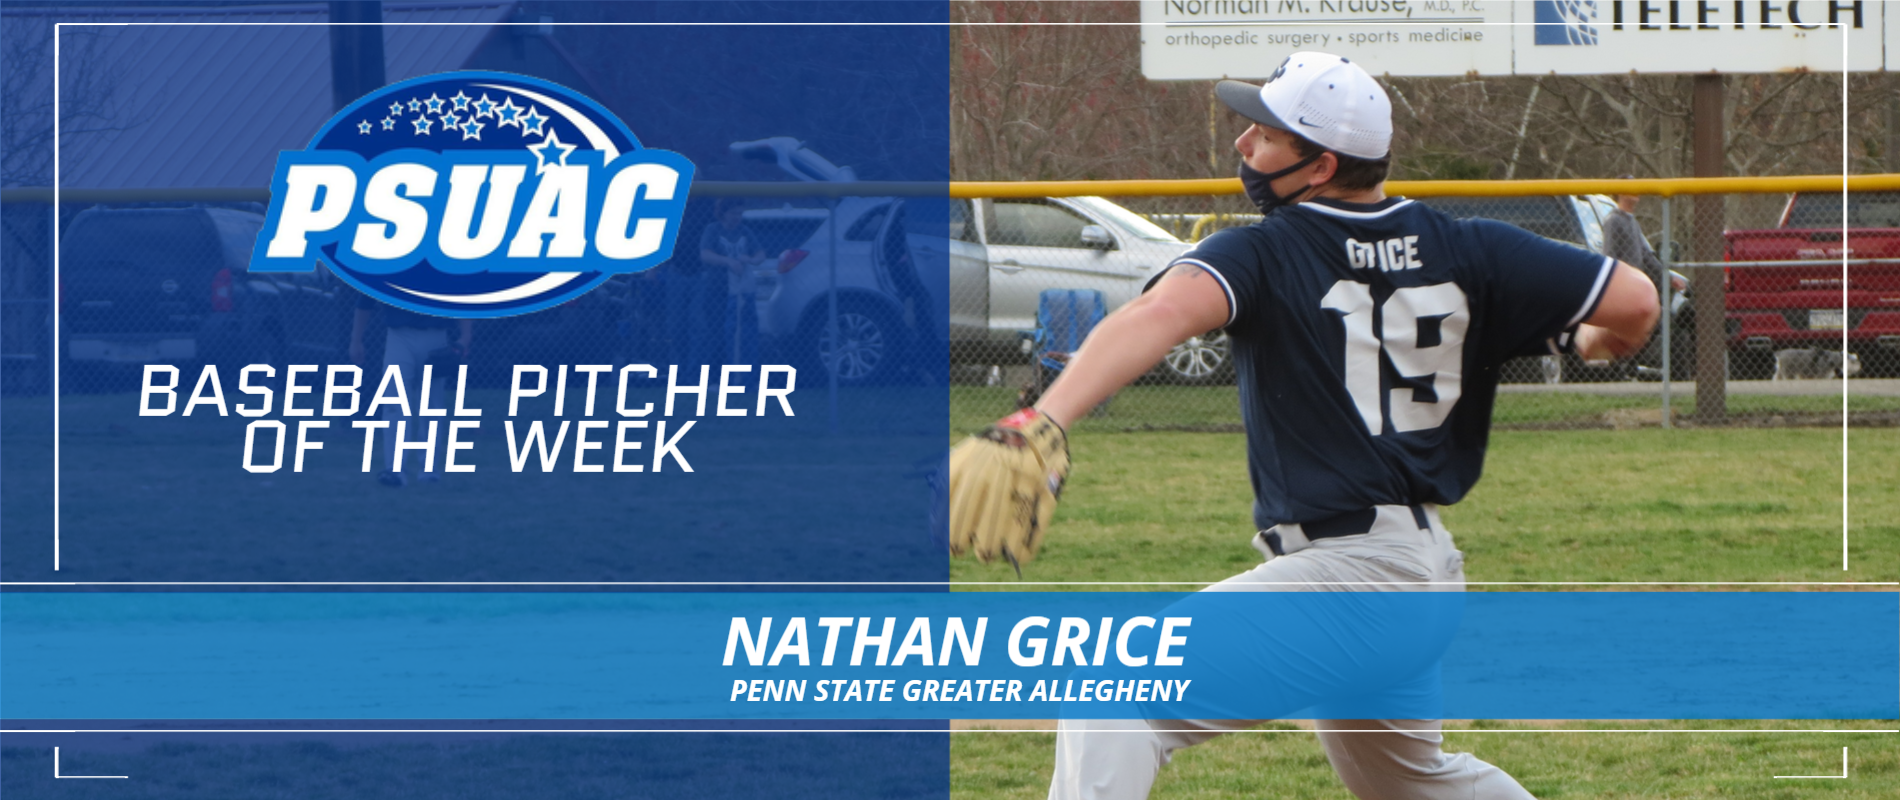 Penn State Greater Allegheny's Nathan Grice.